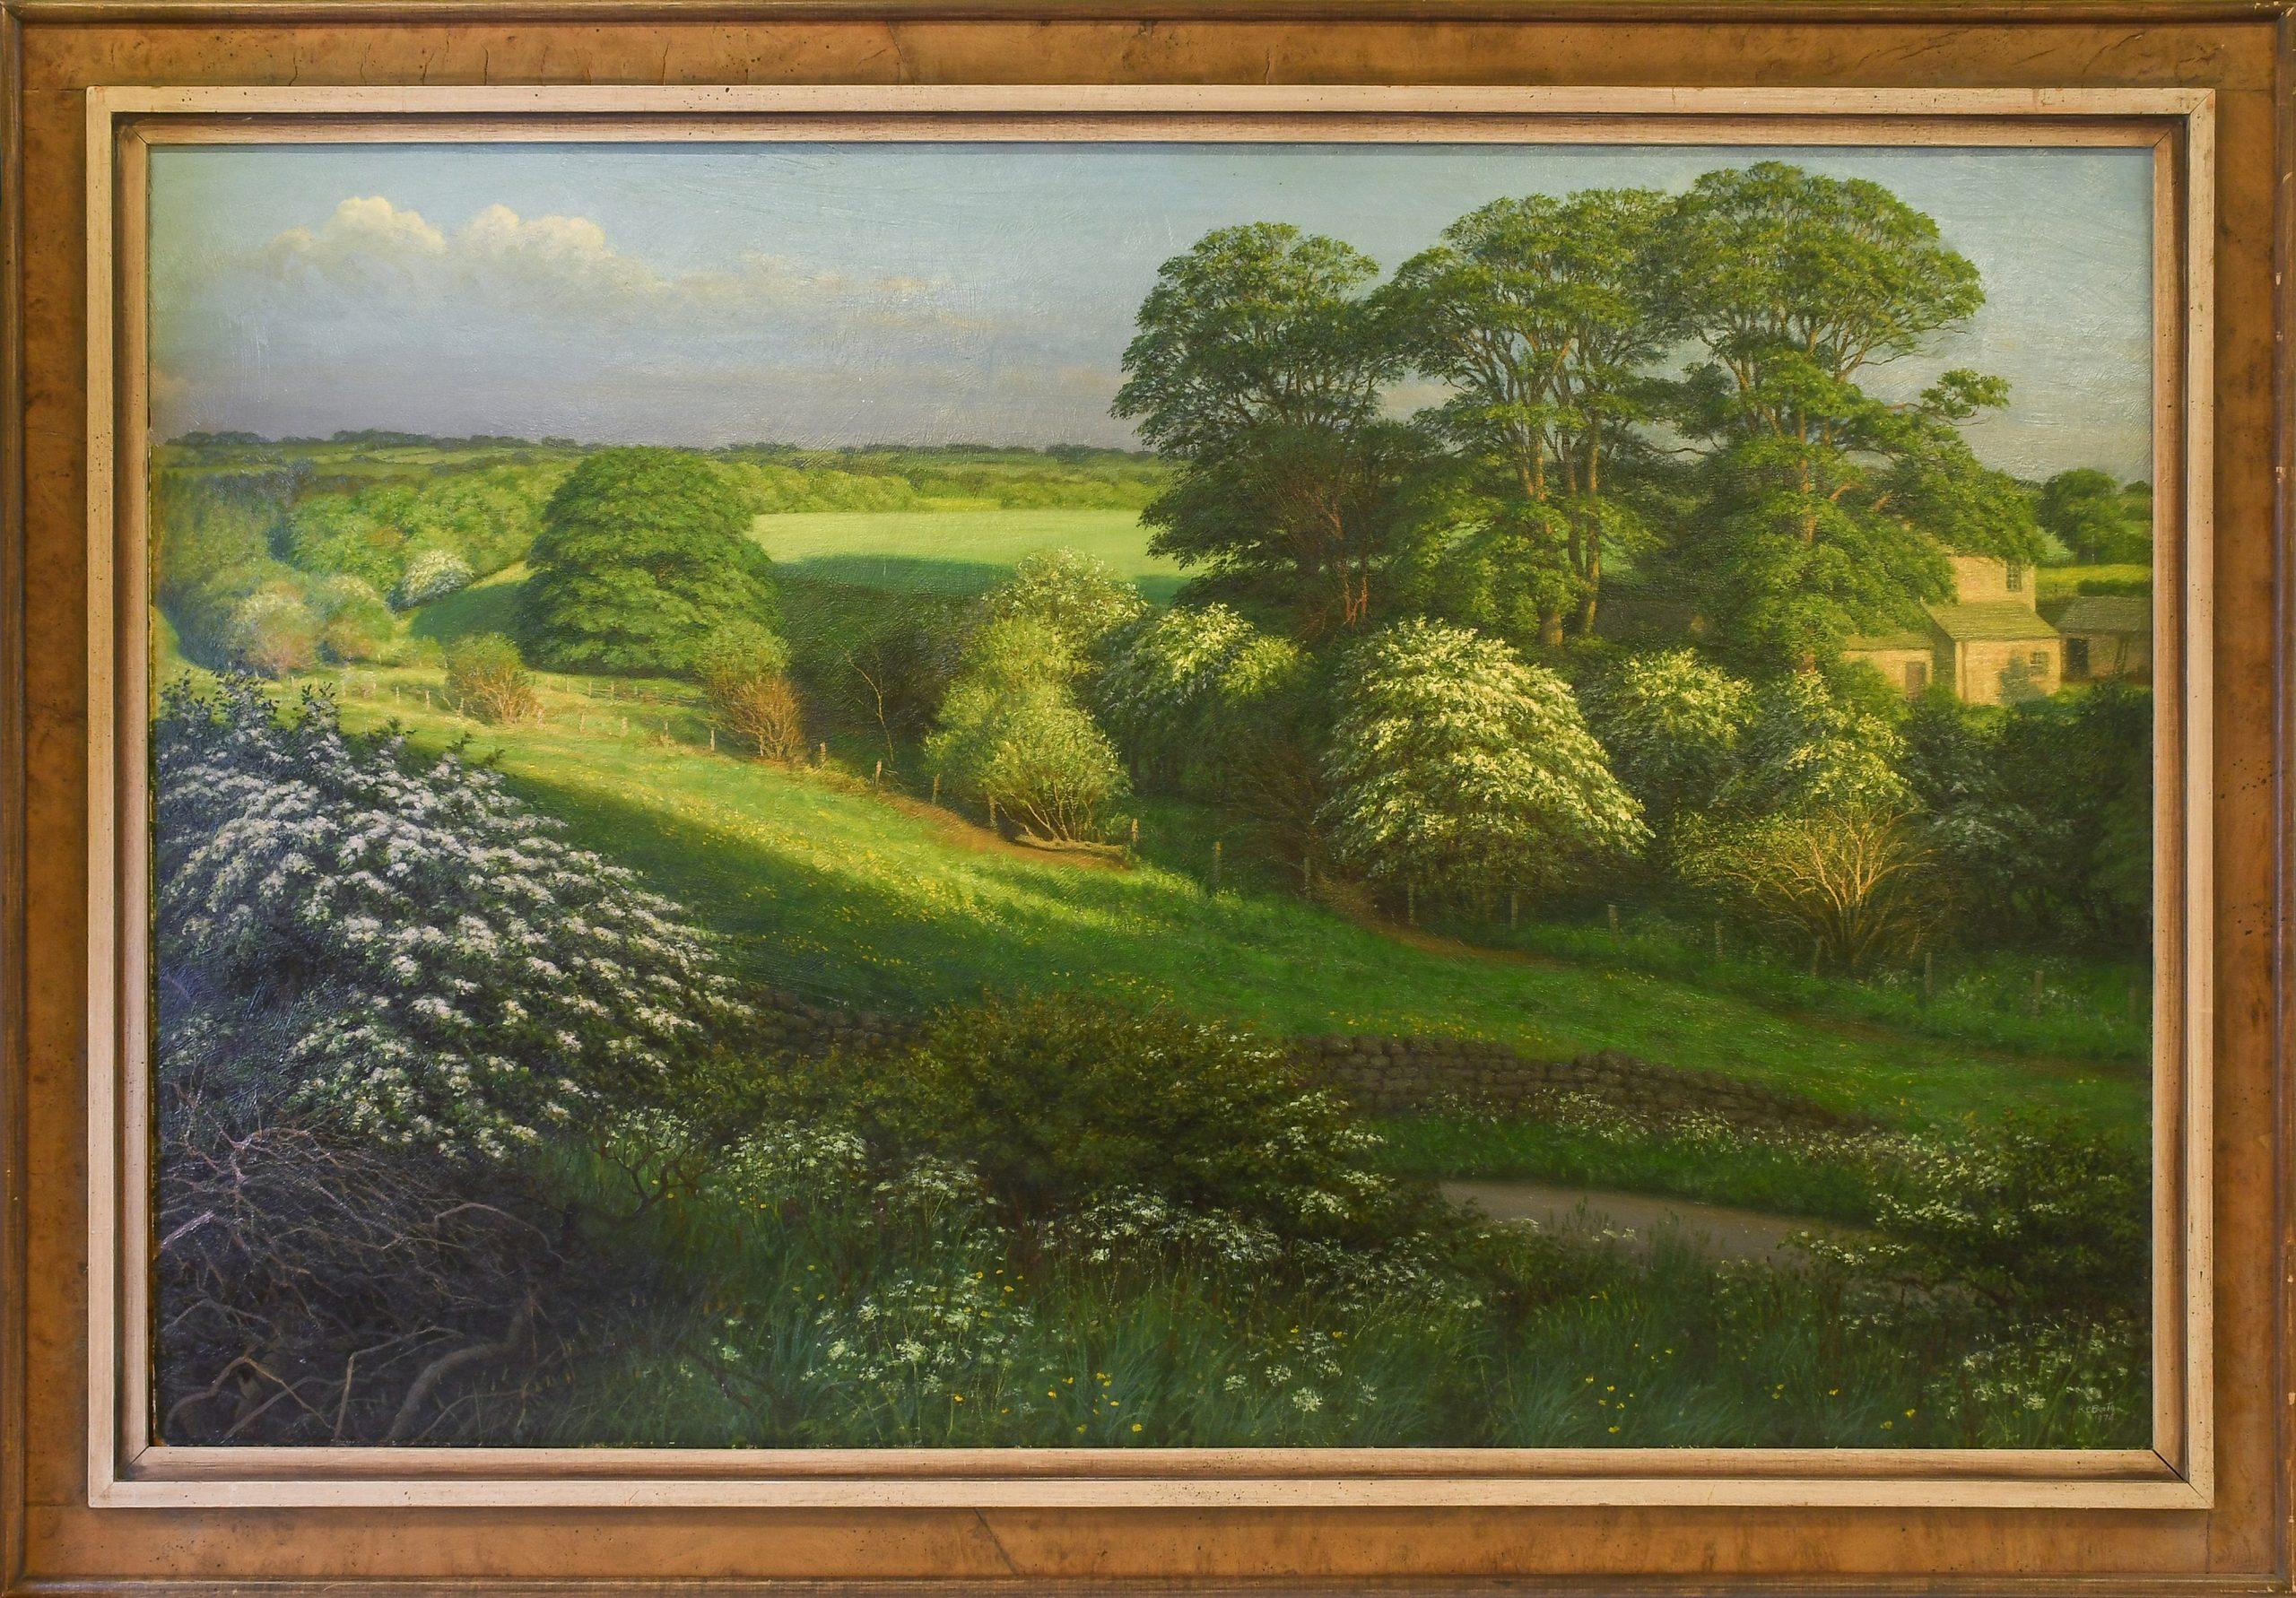 Evening Landscape in Late May, 1970s Yorkshire Landscape, Oil on Board, Signed - Painting by Raymond Booth